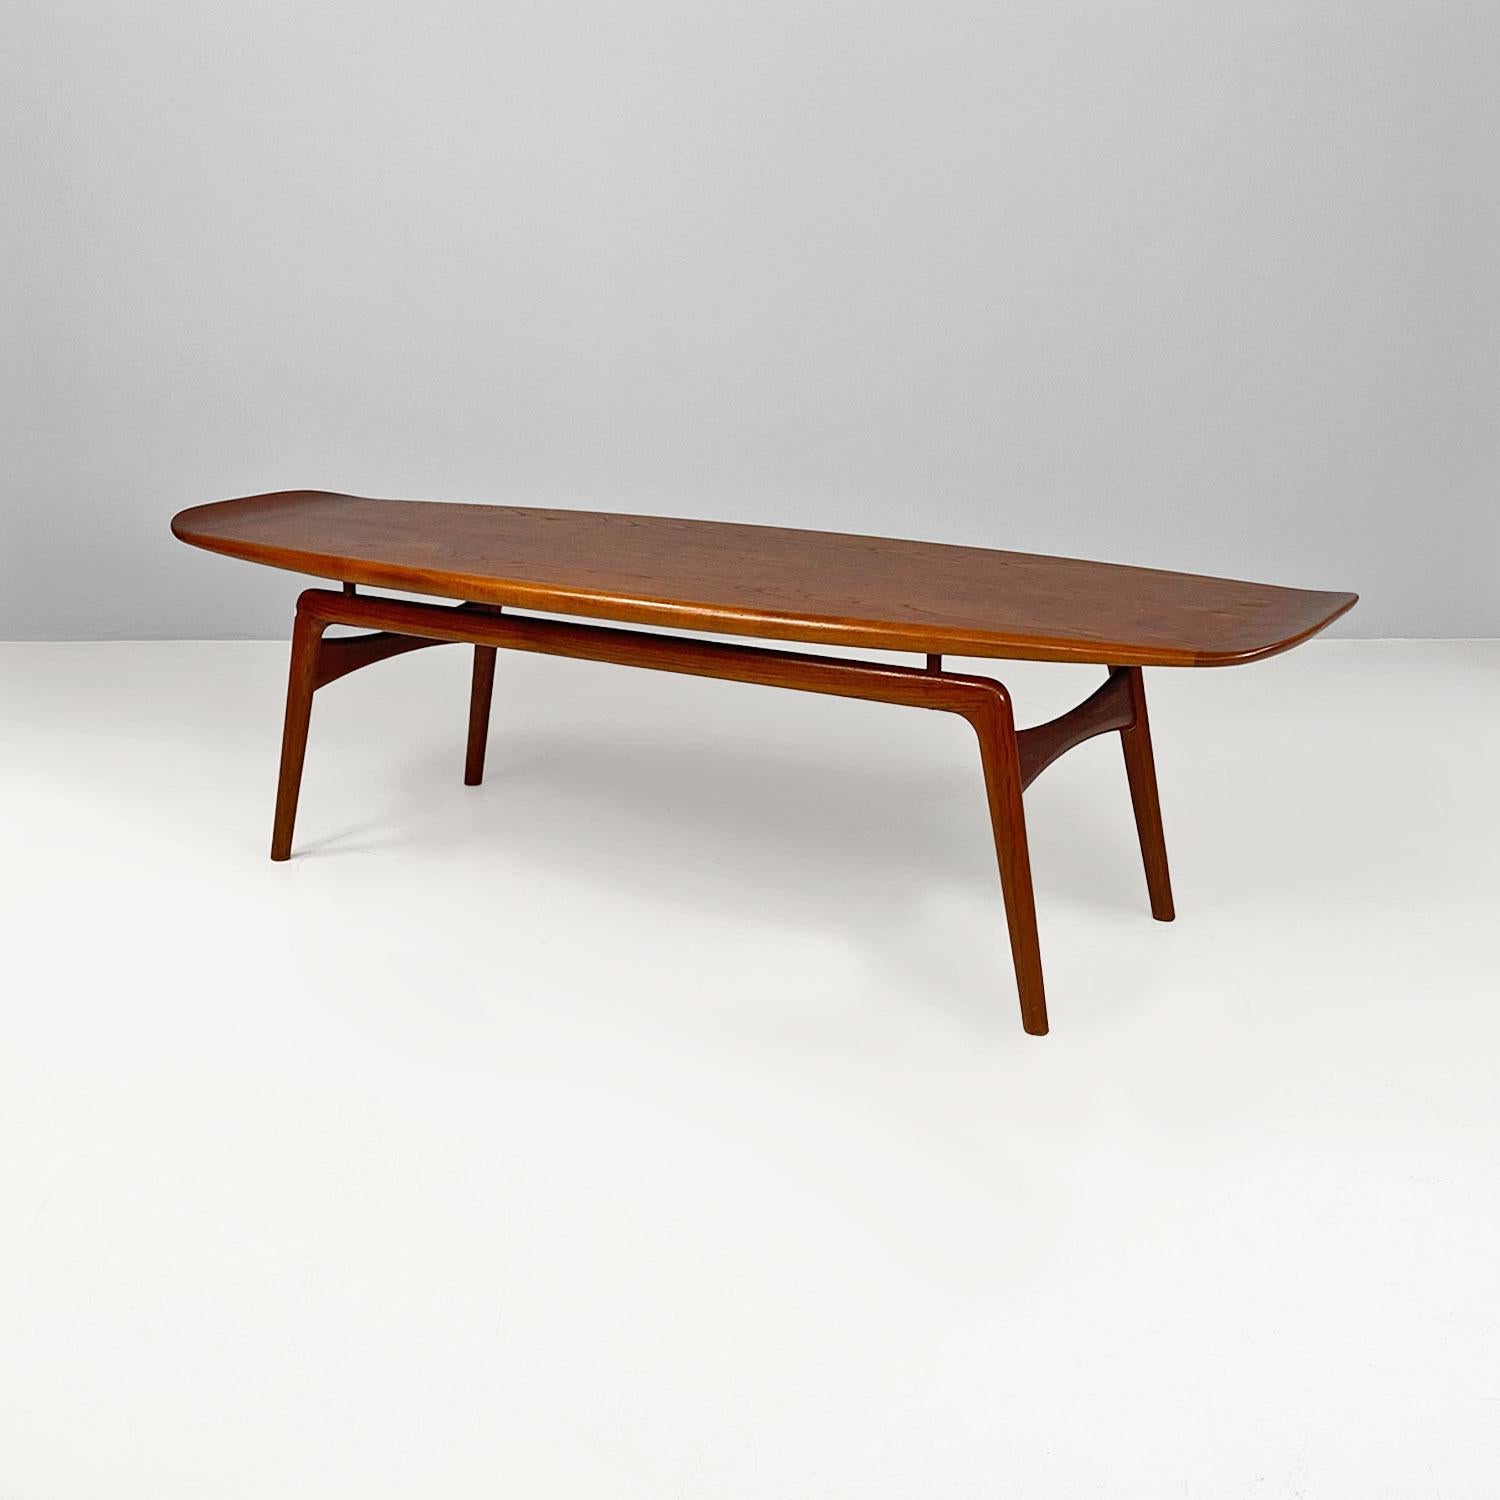 Danish mid-century teak surfboard table by Hovmand-Olsen for Mogens Kold, 1960s
Surfboard model coffee table, in teak wood, with an elongated top and shaped leg.
Designed by Hovmand-Olsen for Mogens Kold, ca. 1960.
In excellent condition and